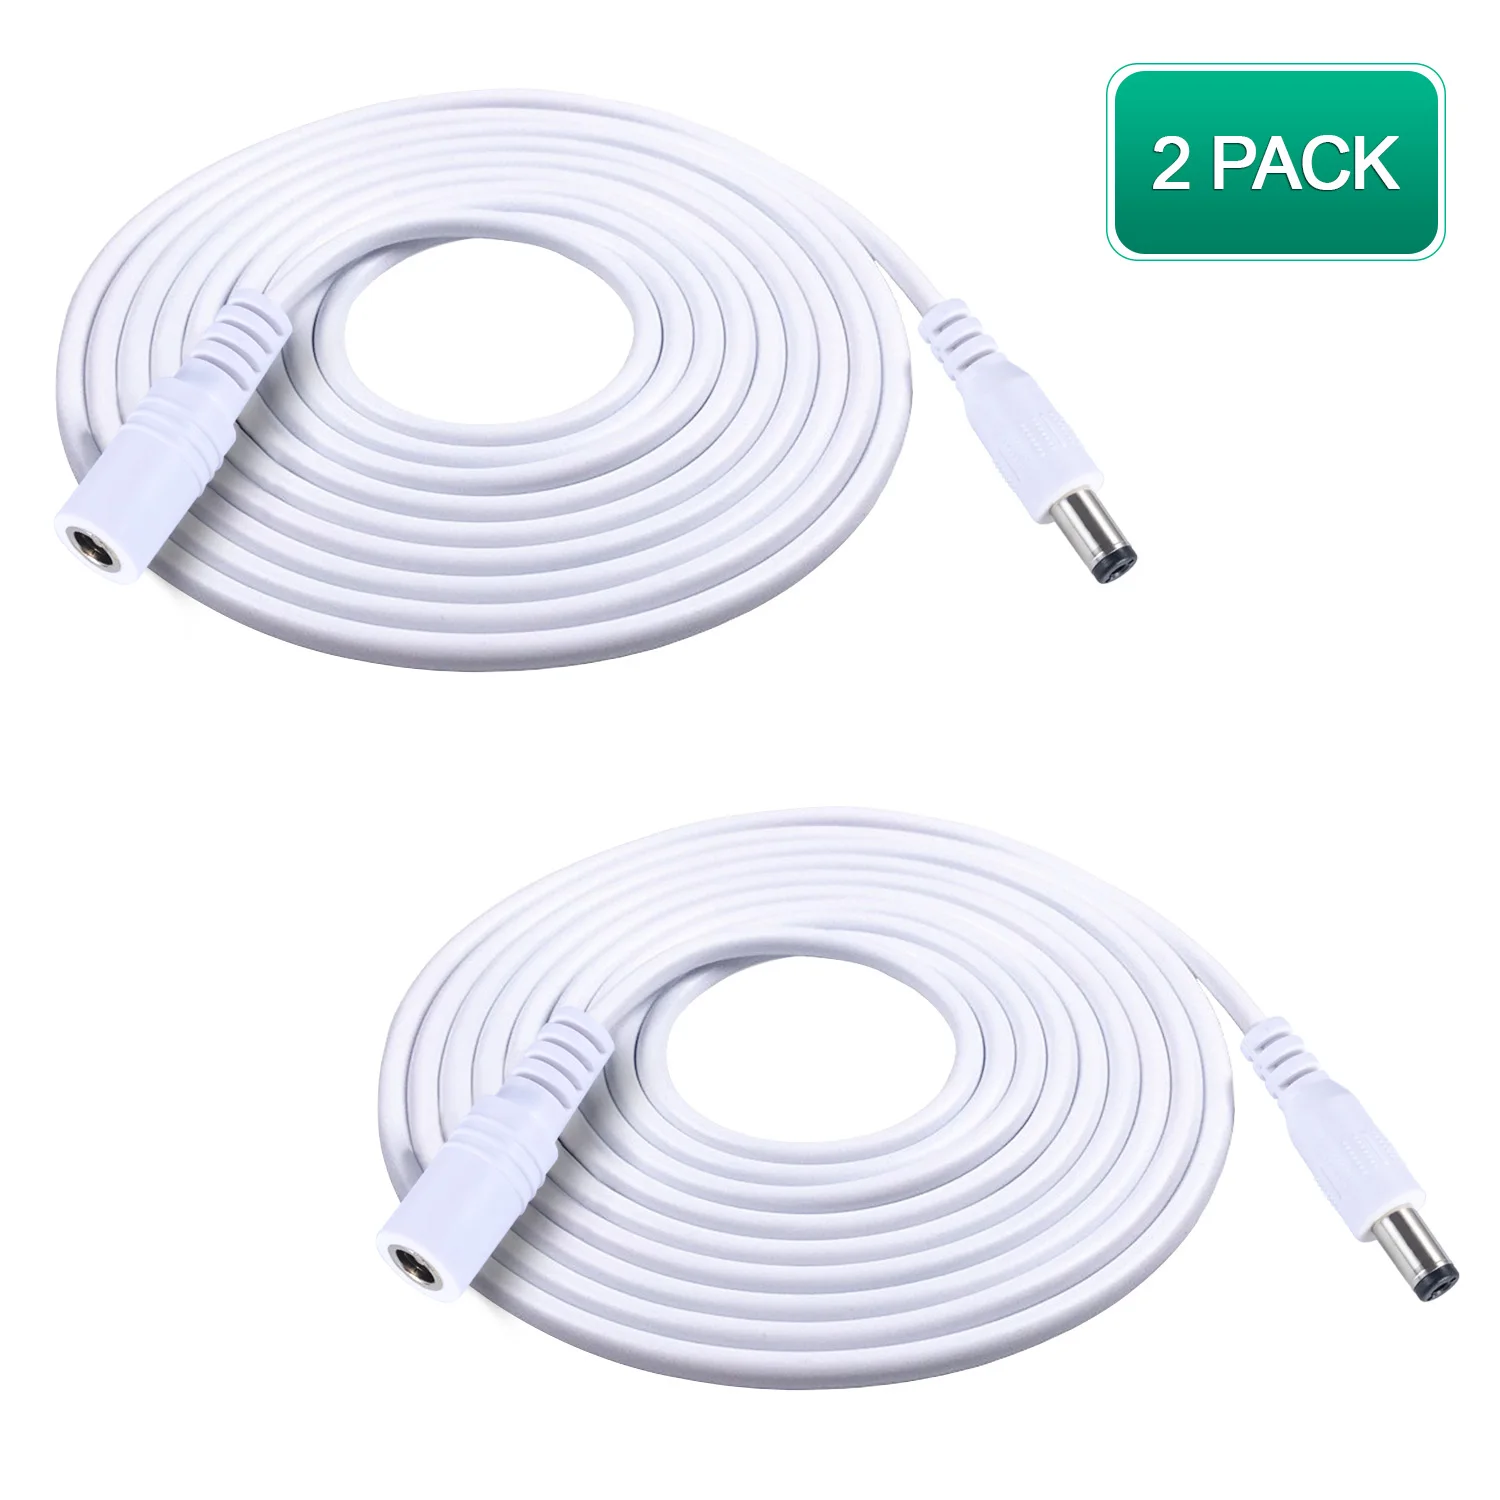 

2 Pack 12ft 2.1mm x 5.5mm Male to Female DC Extension Cable 20AWG White for 5V 12V 24V Wireless Security/CCTV/IP Camera